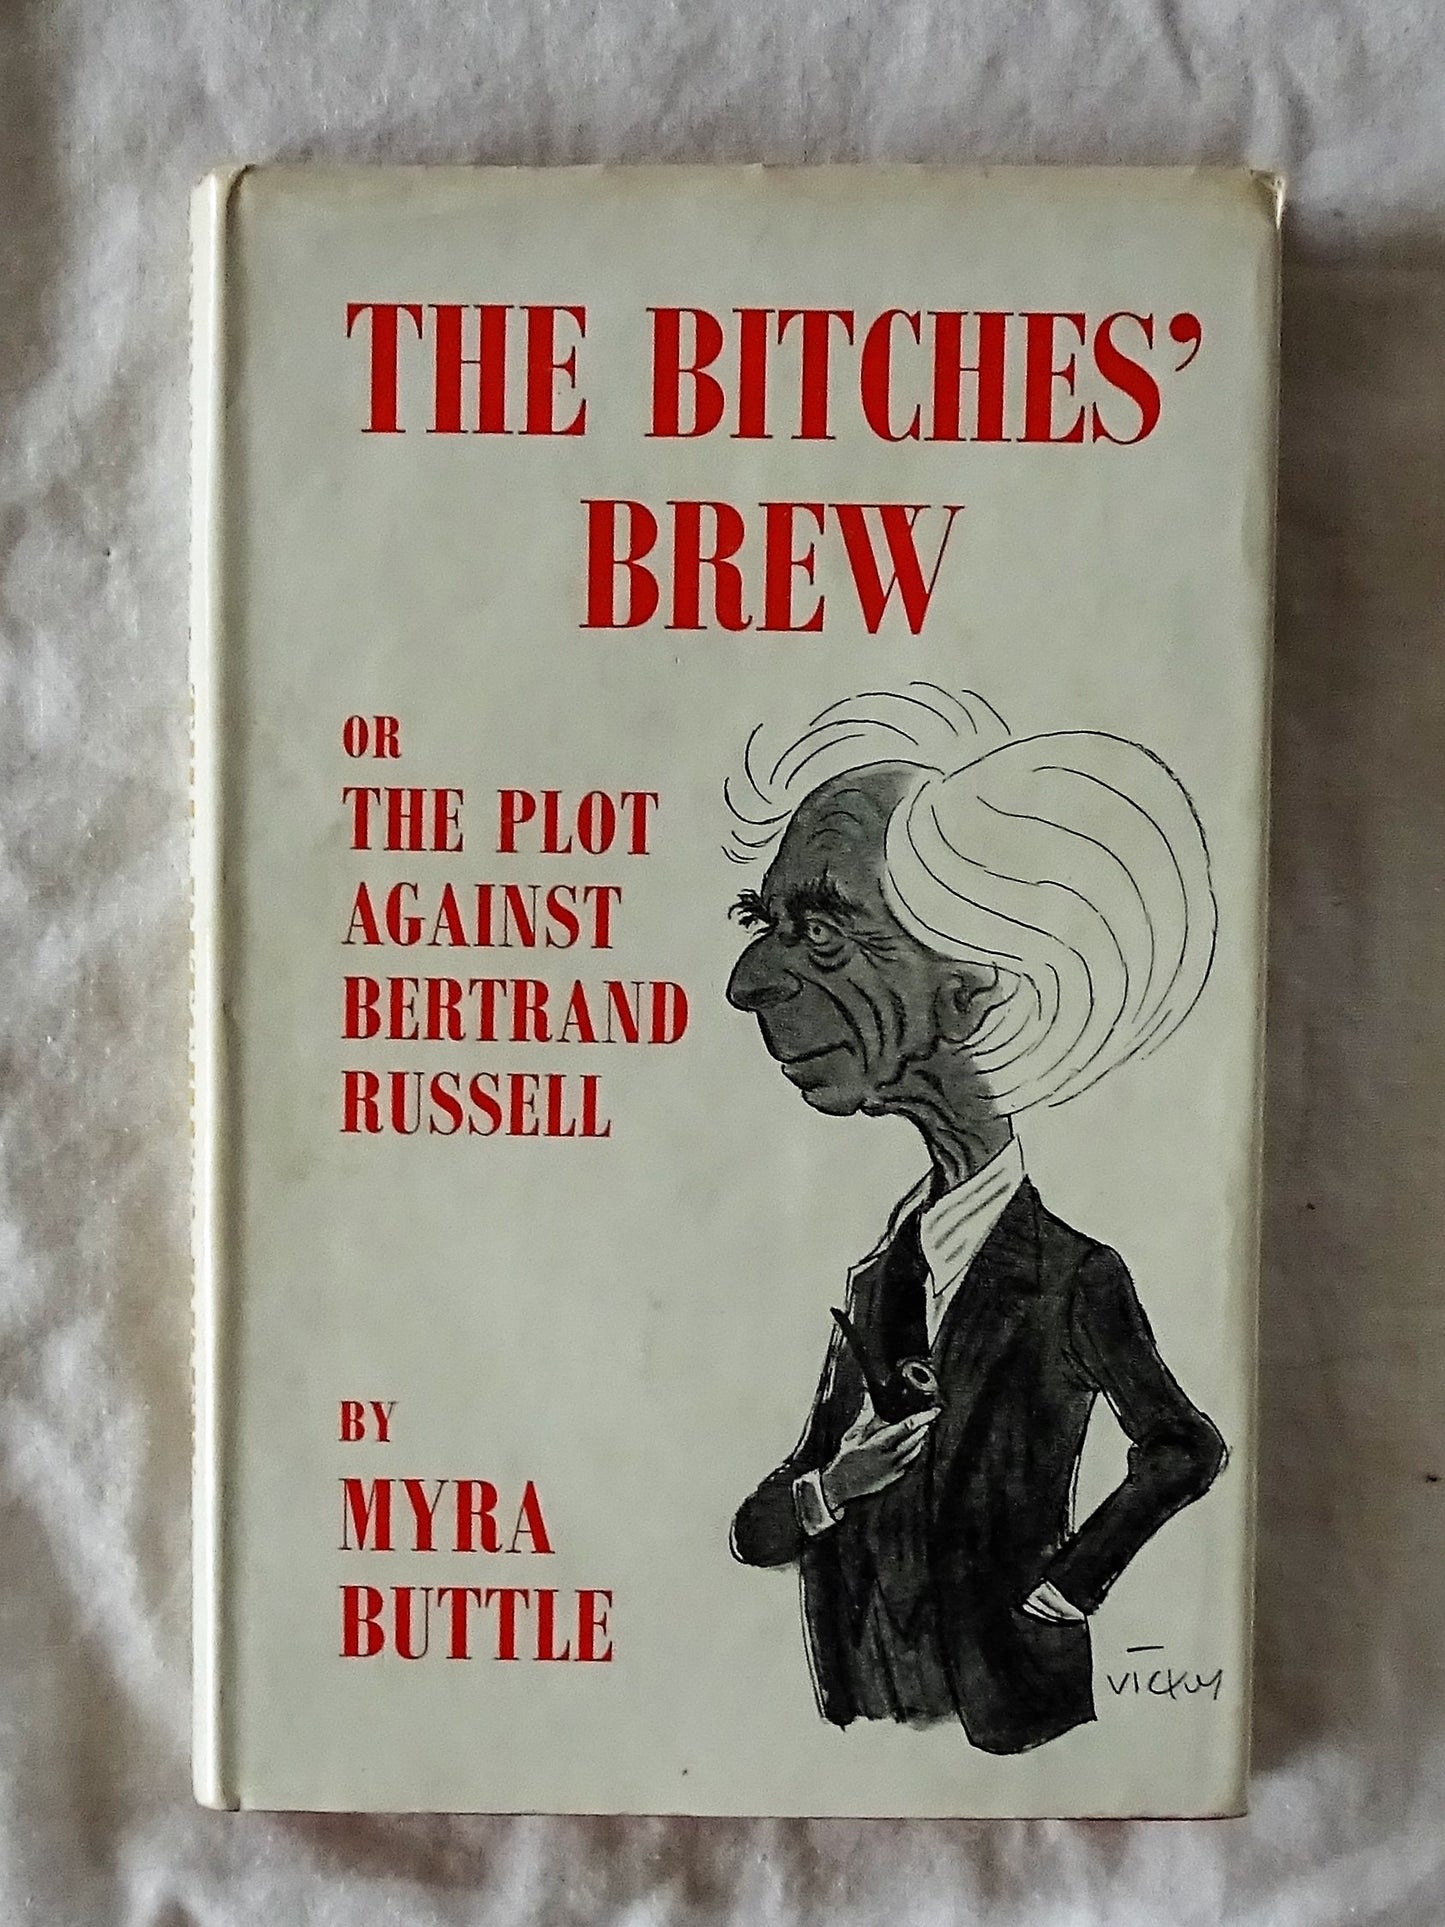 The Bitches' Brew by Myra Buttle